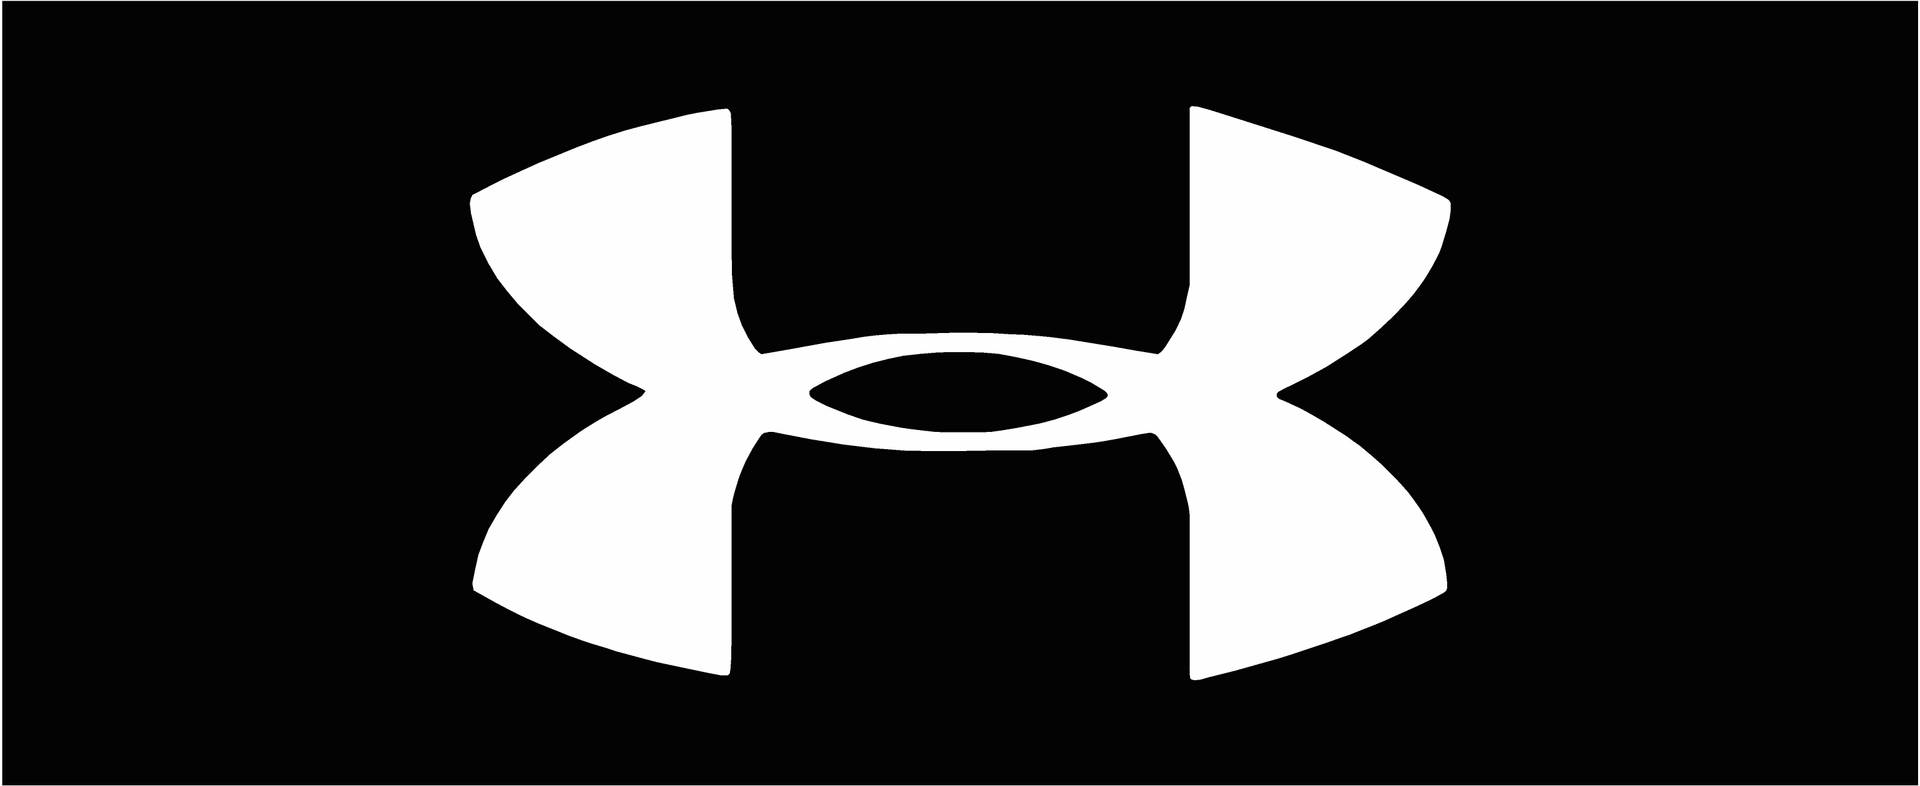 6019X2465 Under Armour Wallpaper and Background